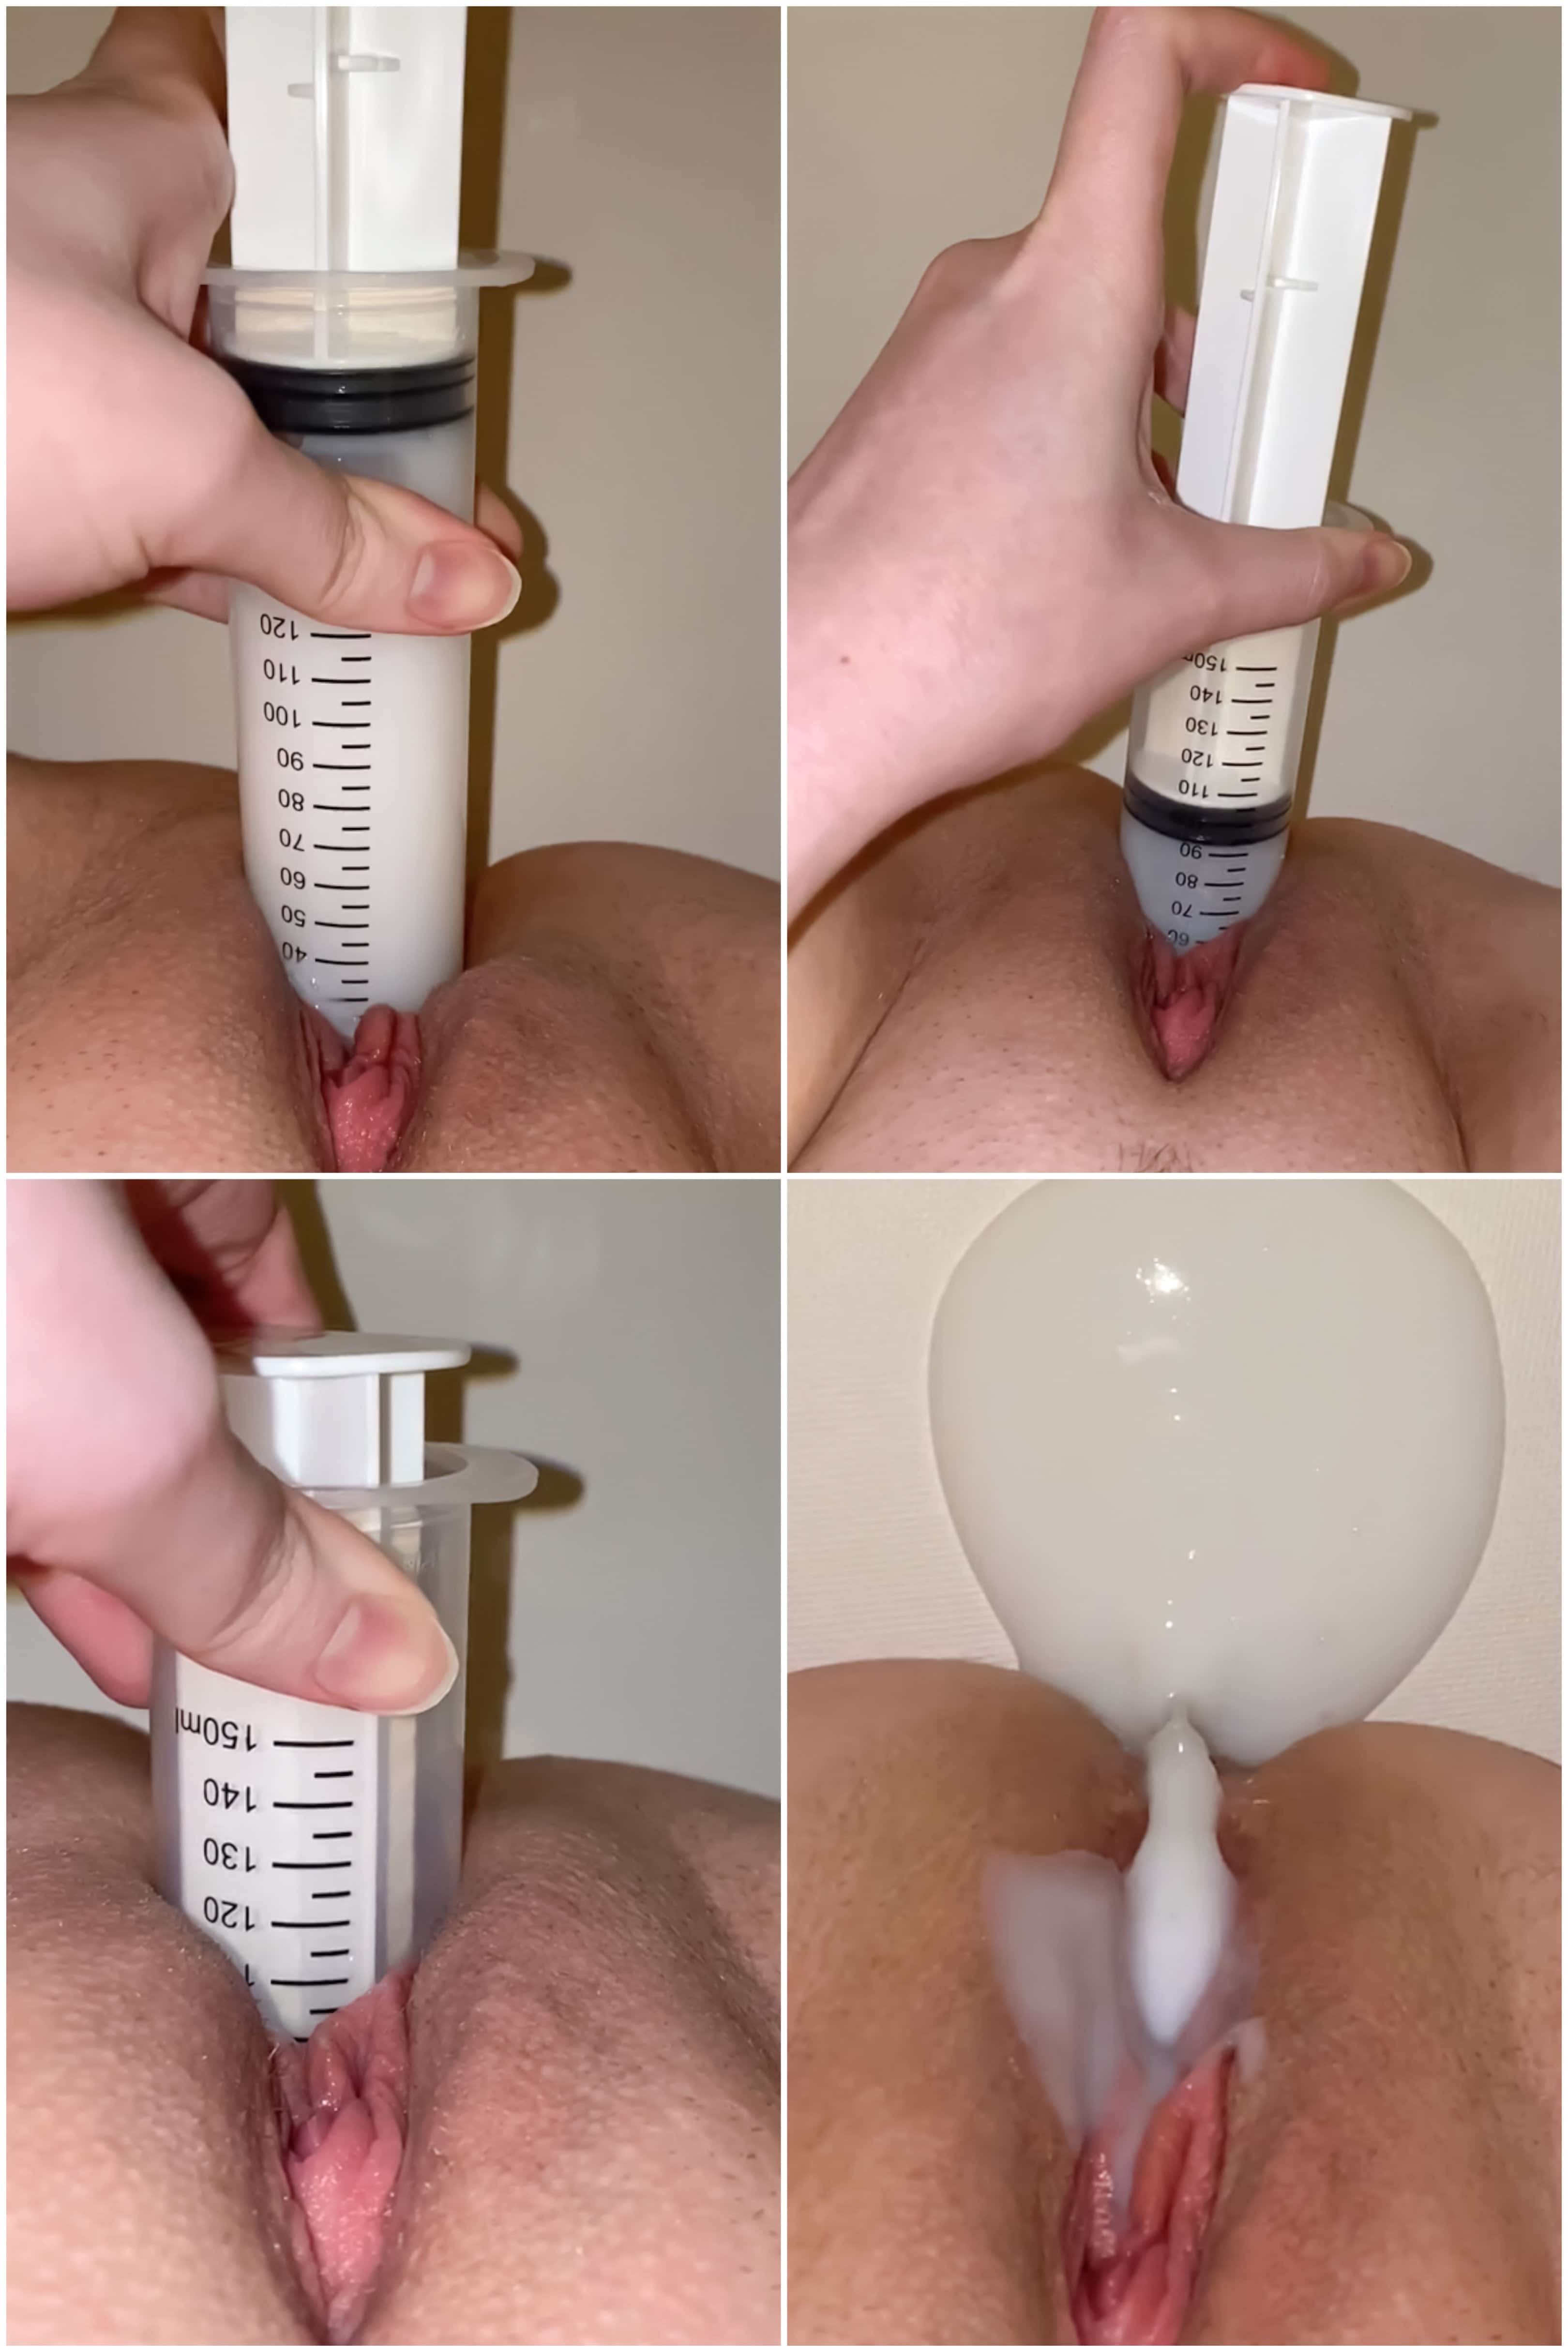 Artificial insemination with sperm as lubricant Sperm ice cubes photo pic